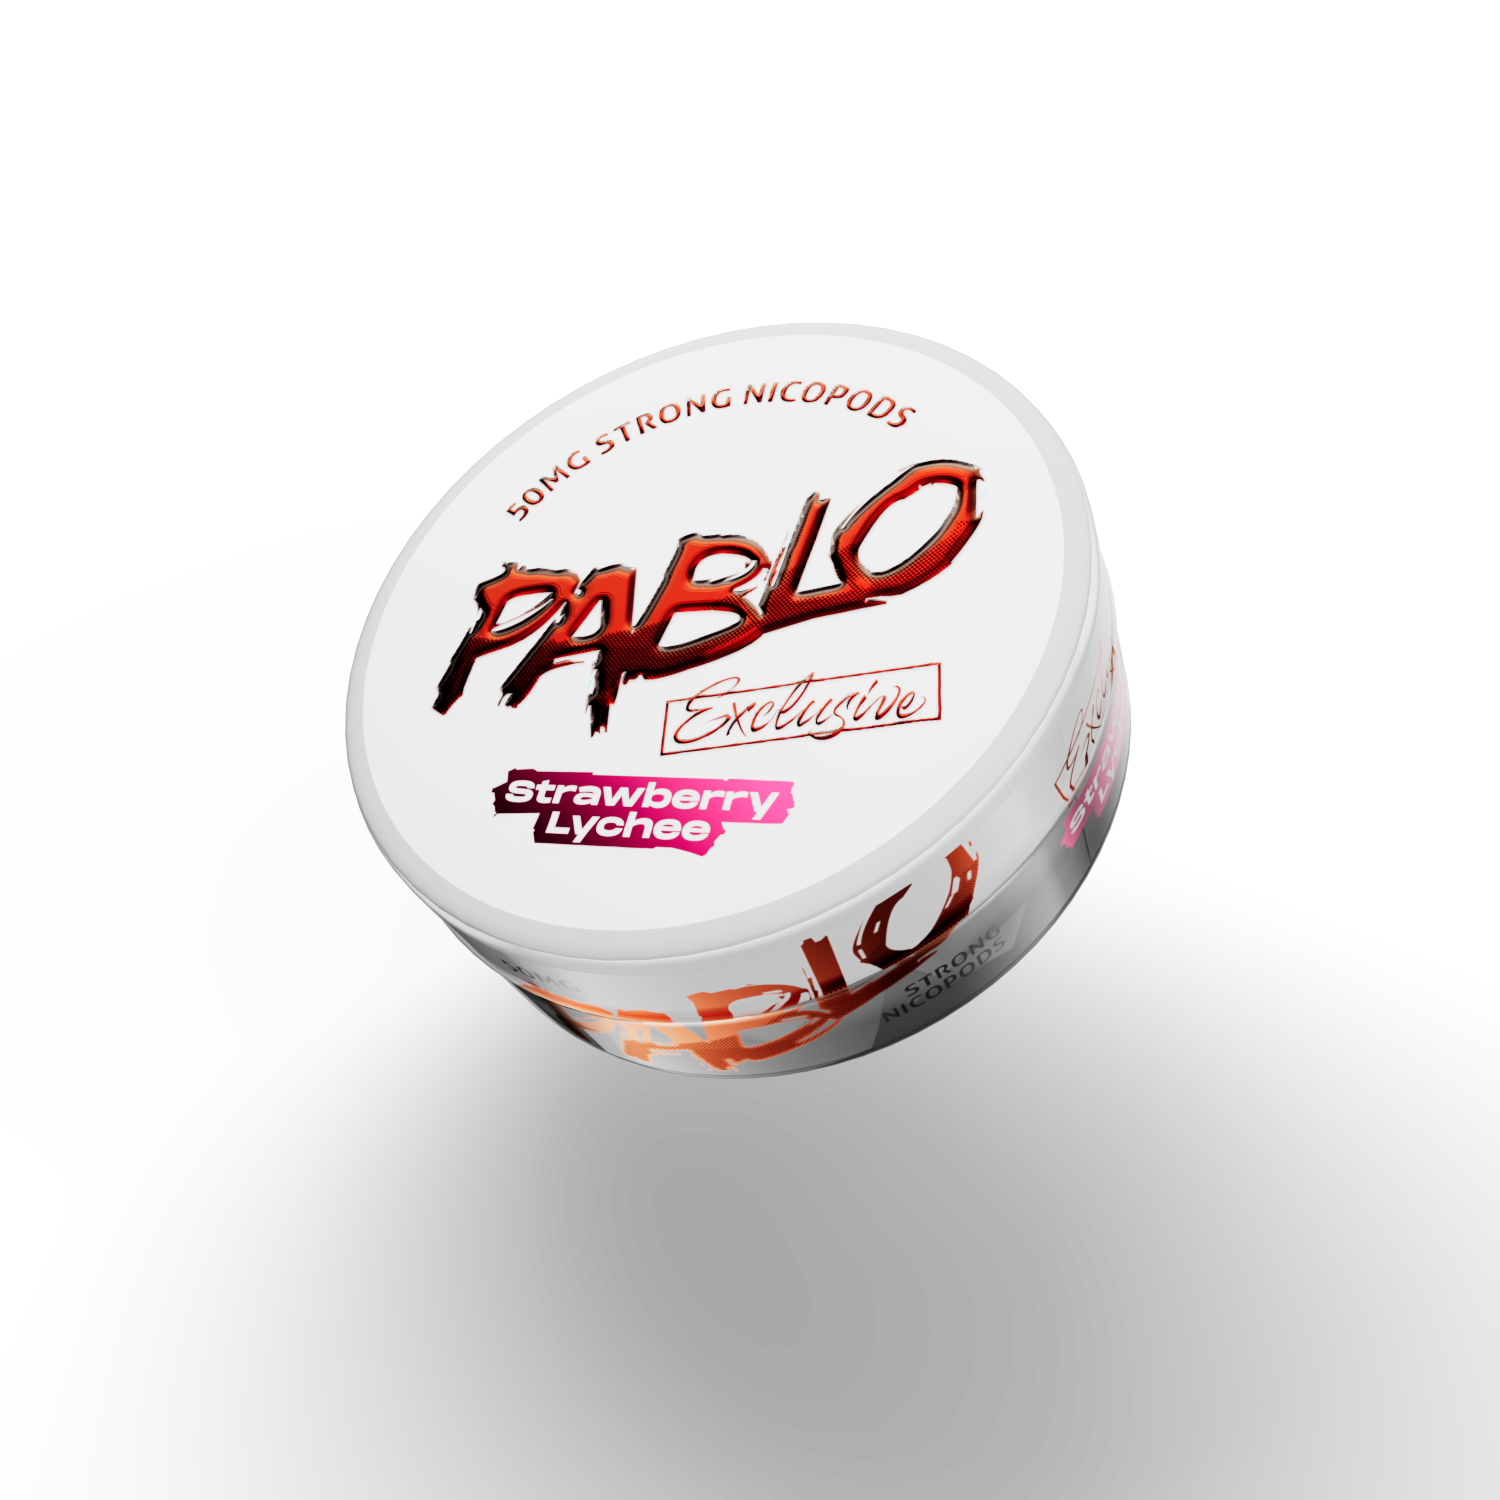 Pablo_Excl_StrawberryLychee_1